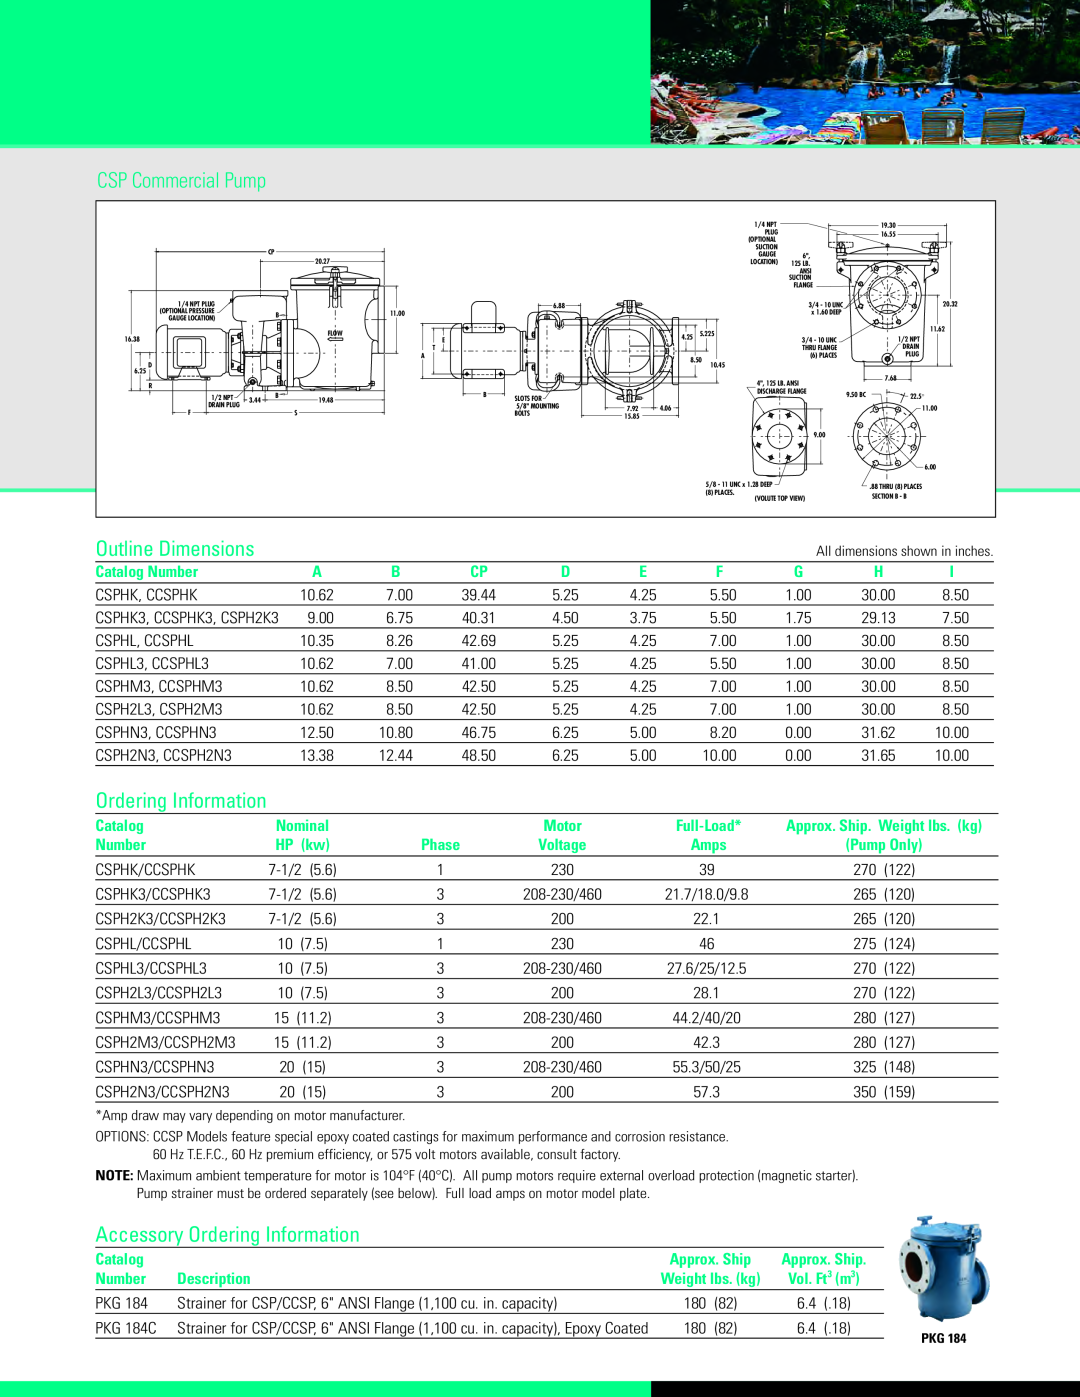 Pentair CSP Series CSP Commercial Pump, Outline Dimensions, Accessory Ordering Information, Catalog Number, Nominal 